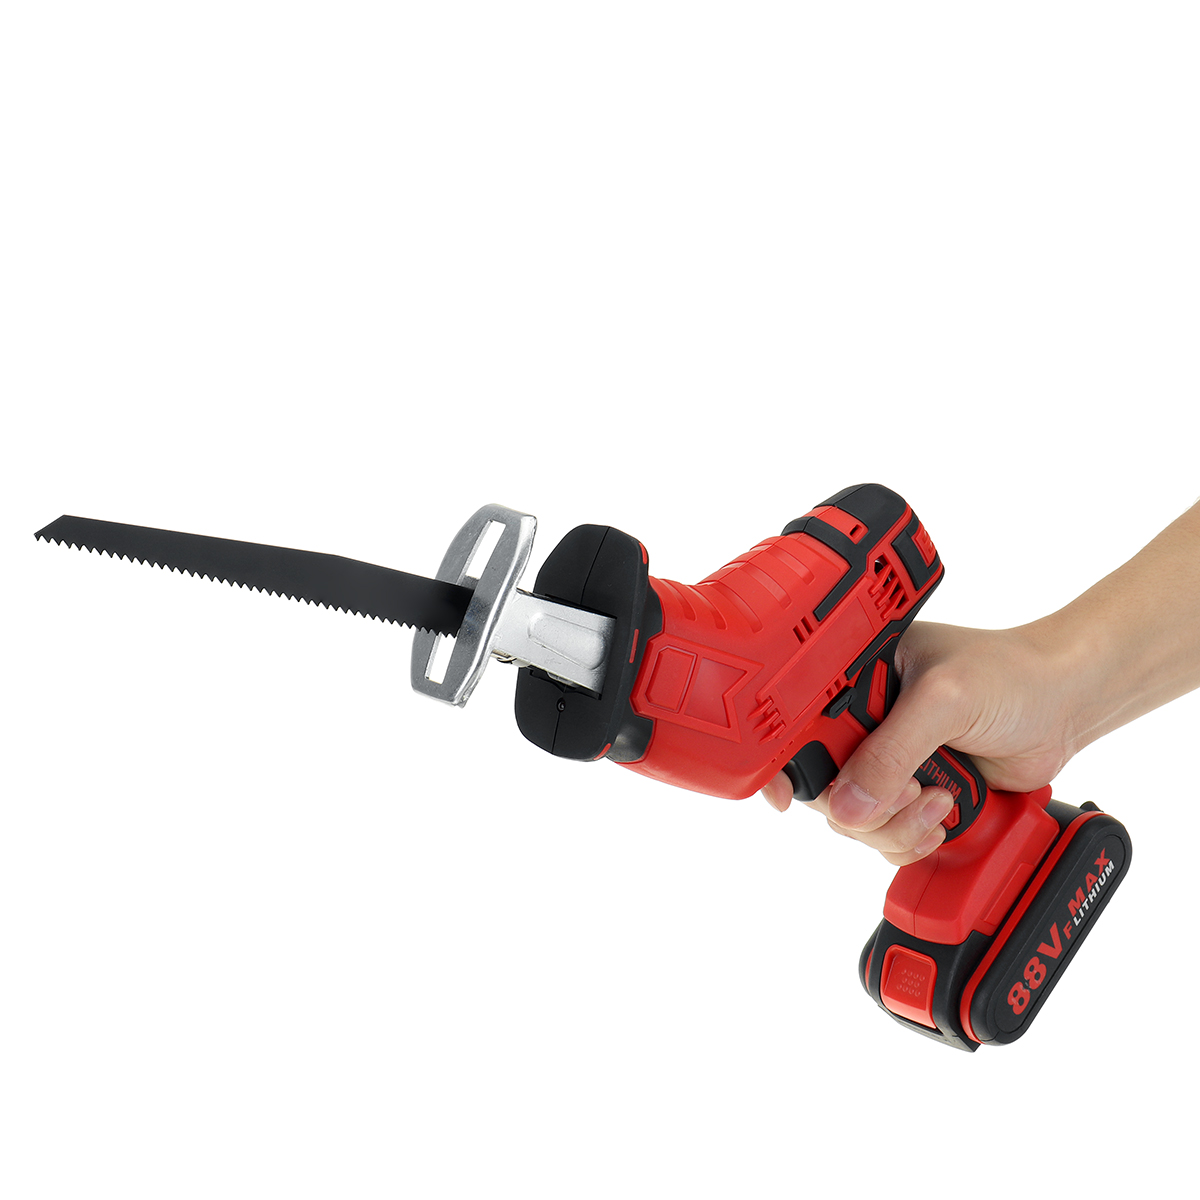 88VF-Cordless-Electric-Reciprocating-Saw-Outdoor-Portable-Woodworking-Tool-One-Hand-Saw-W-12-Battery-1883228-10